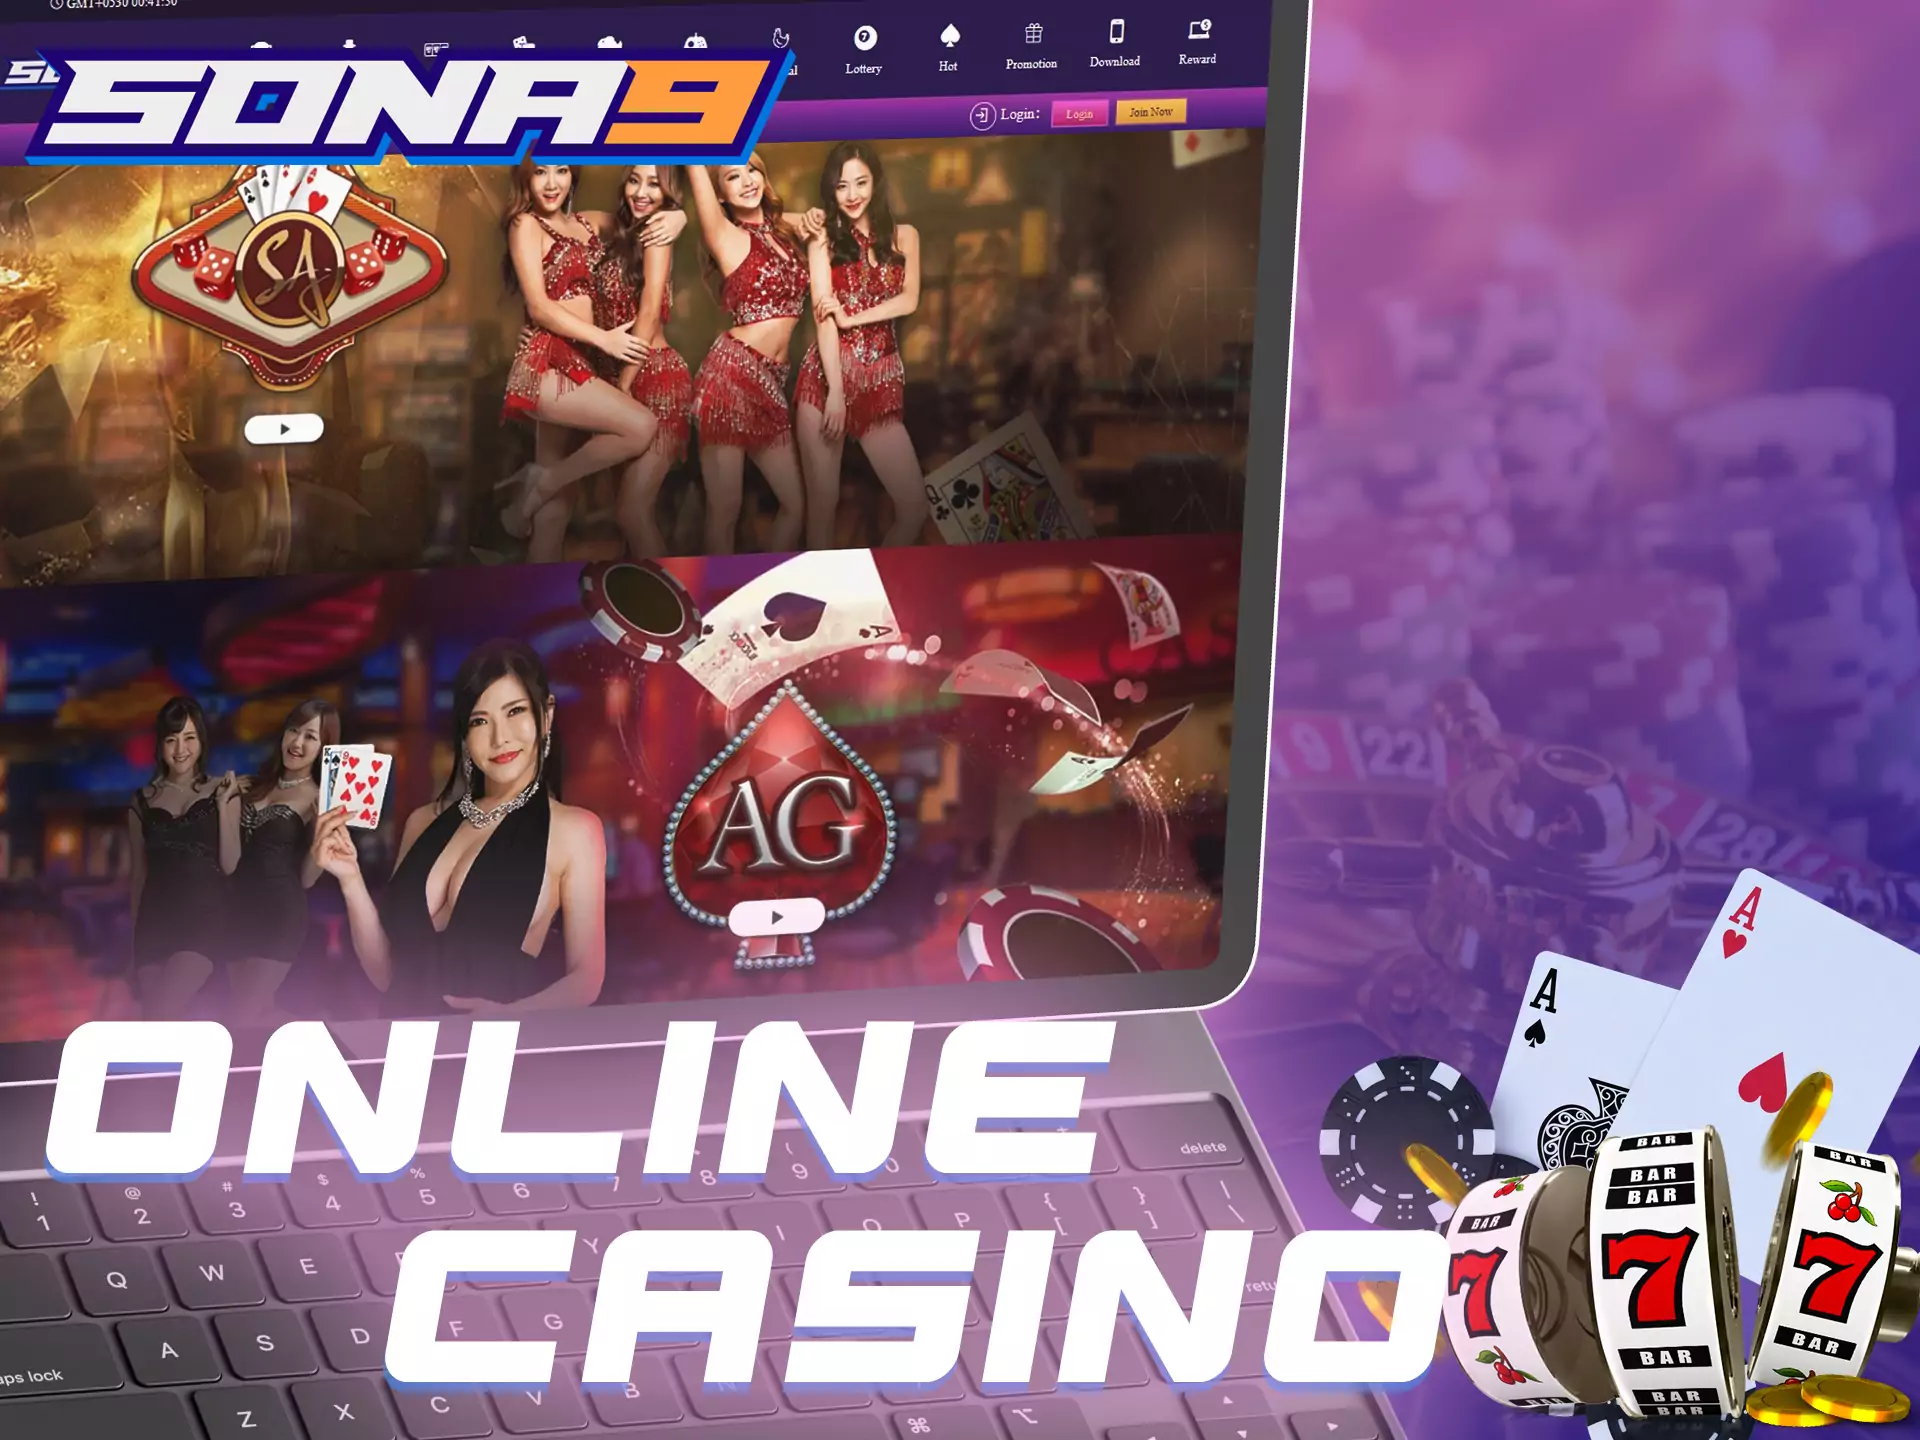 Besides betting, you can play casino games and slots on Sona9.